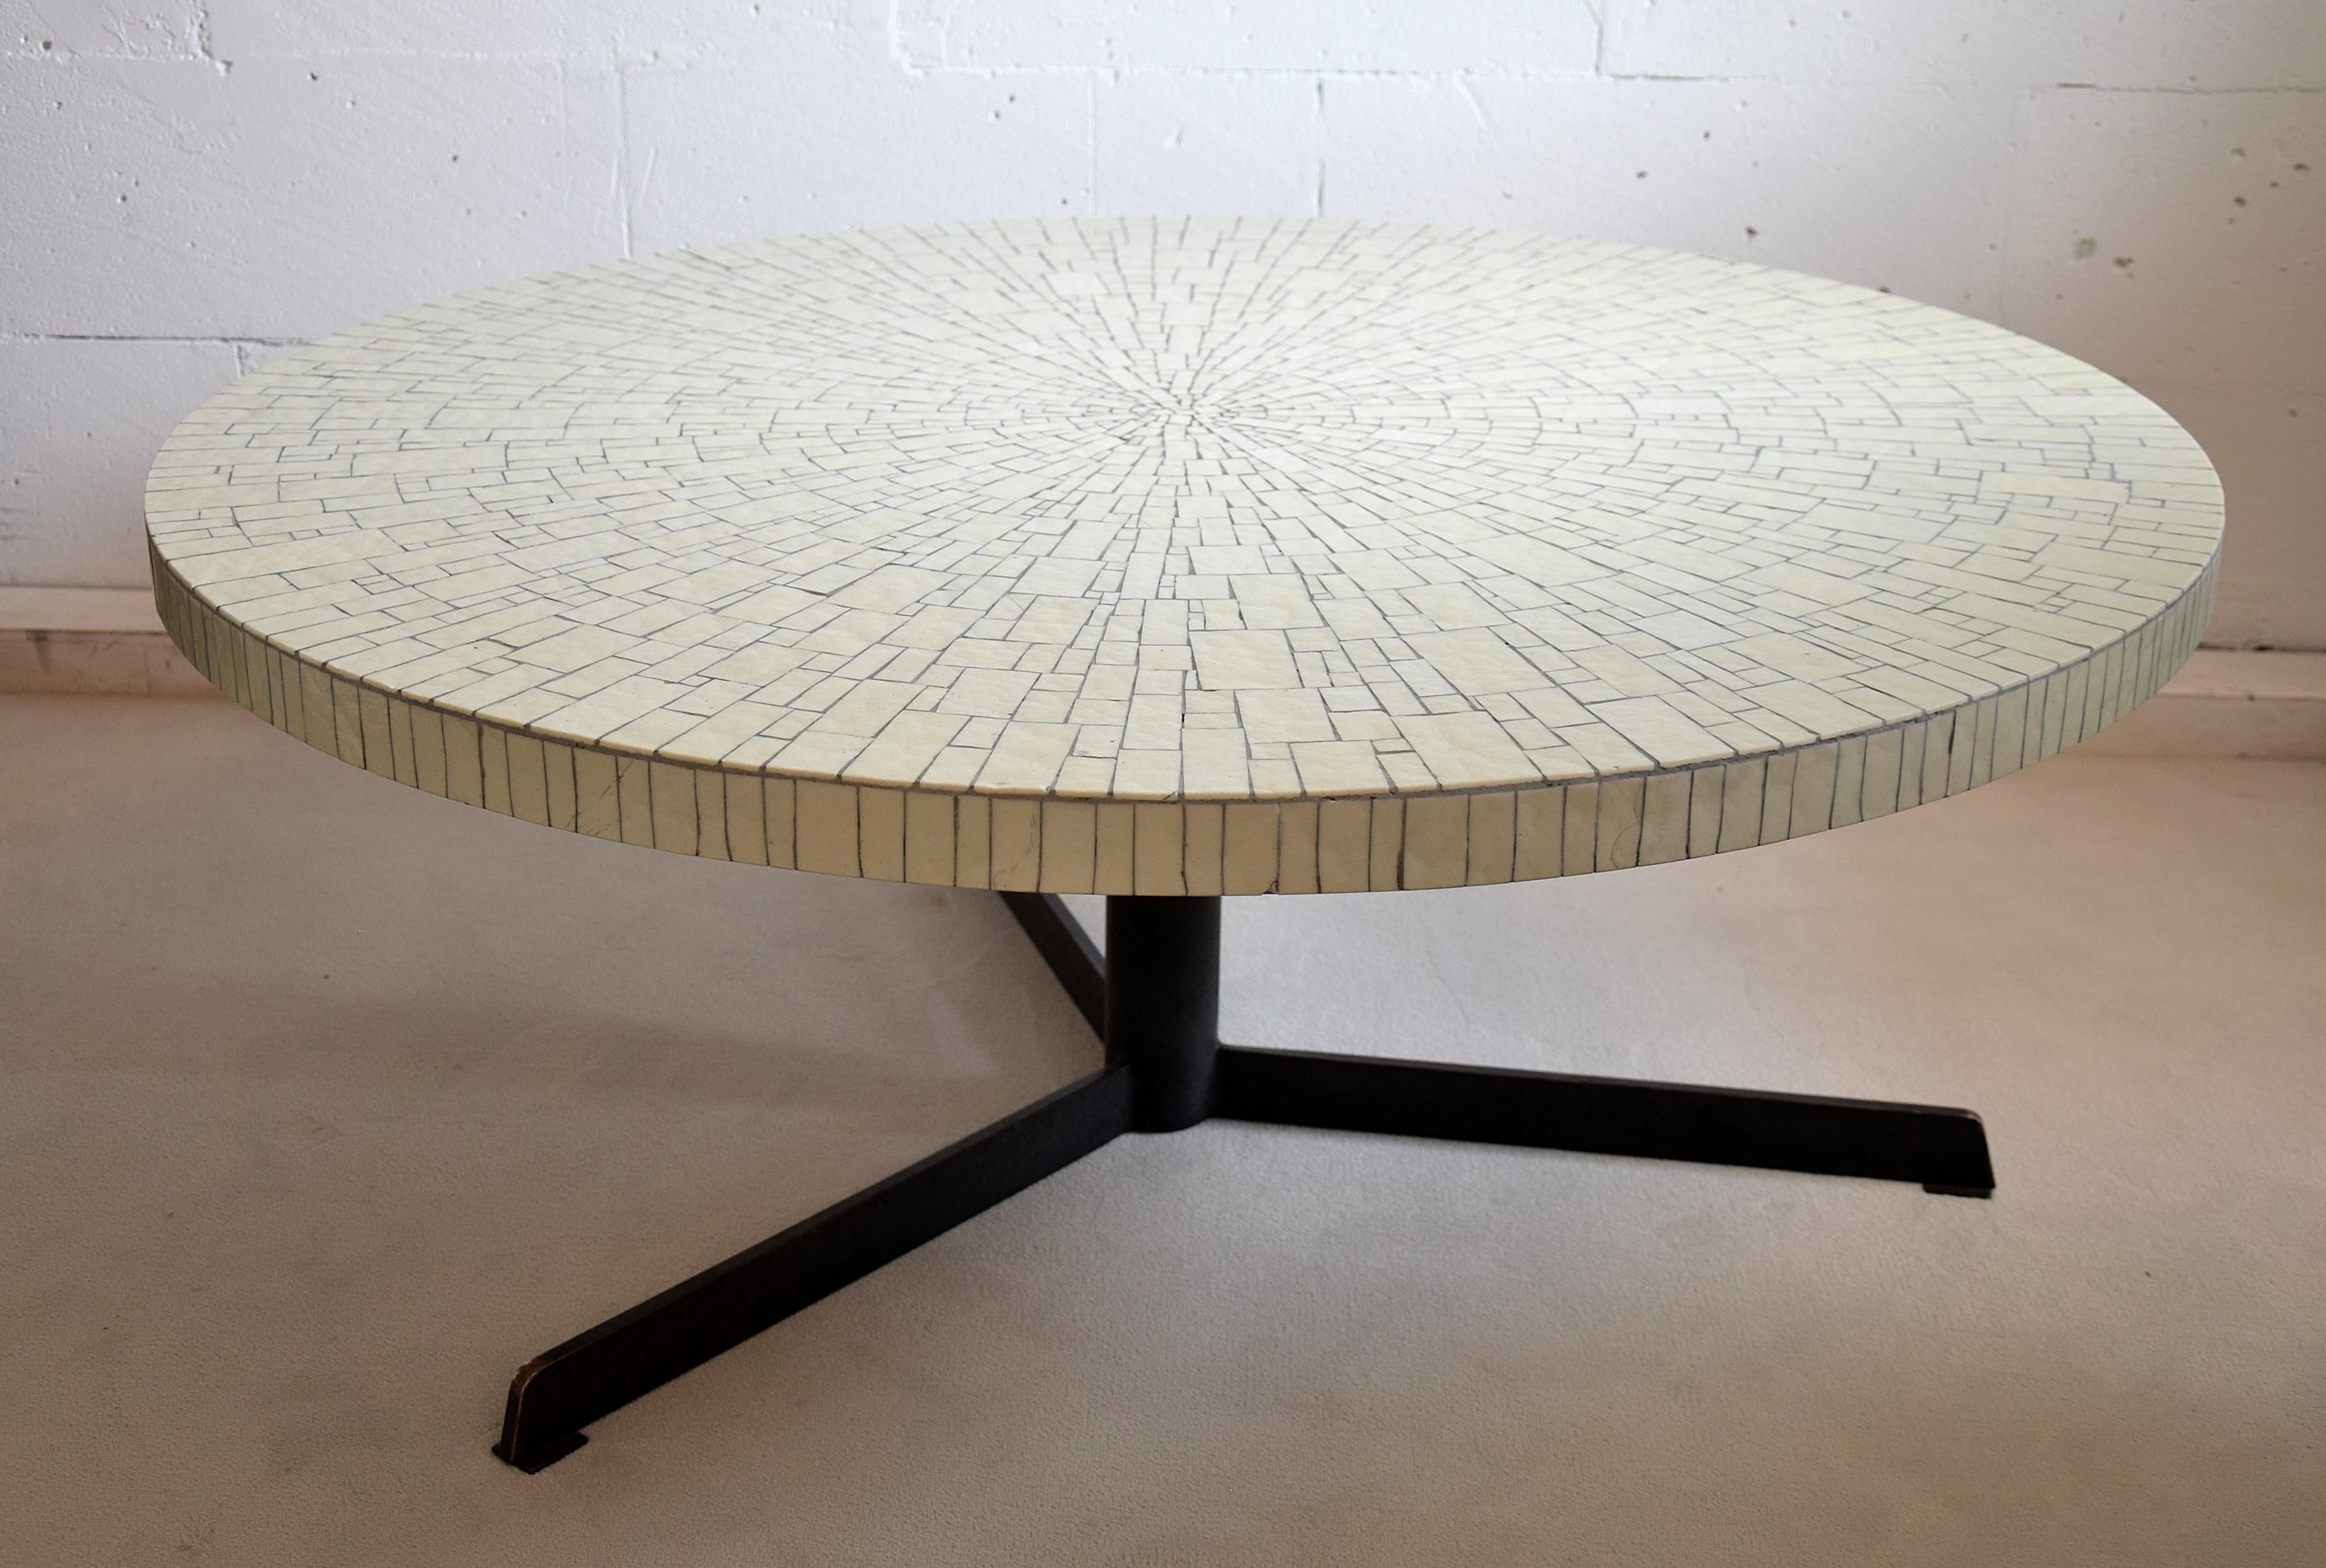 Beautiful and stylish 1960s round white glass mosaic coffee table by Heinz Lilienthal.
The table will be shipped insured overseas in a custom made wooden crate. Cost of transport is crate included.
Lilienthal went into business for himself and